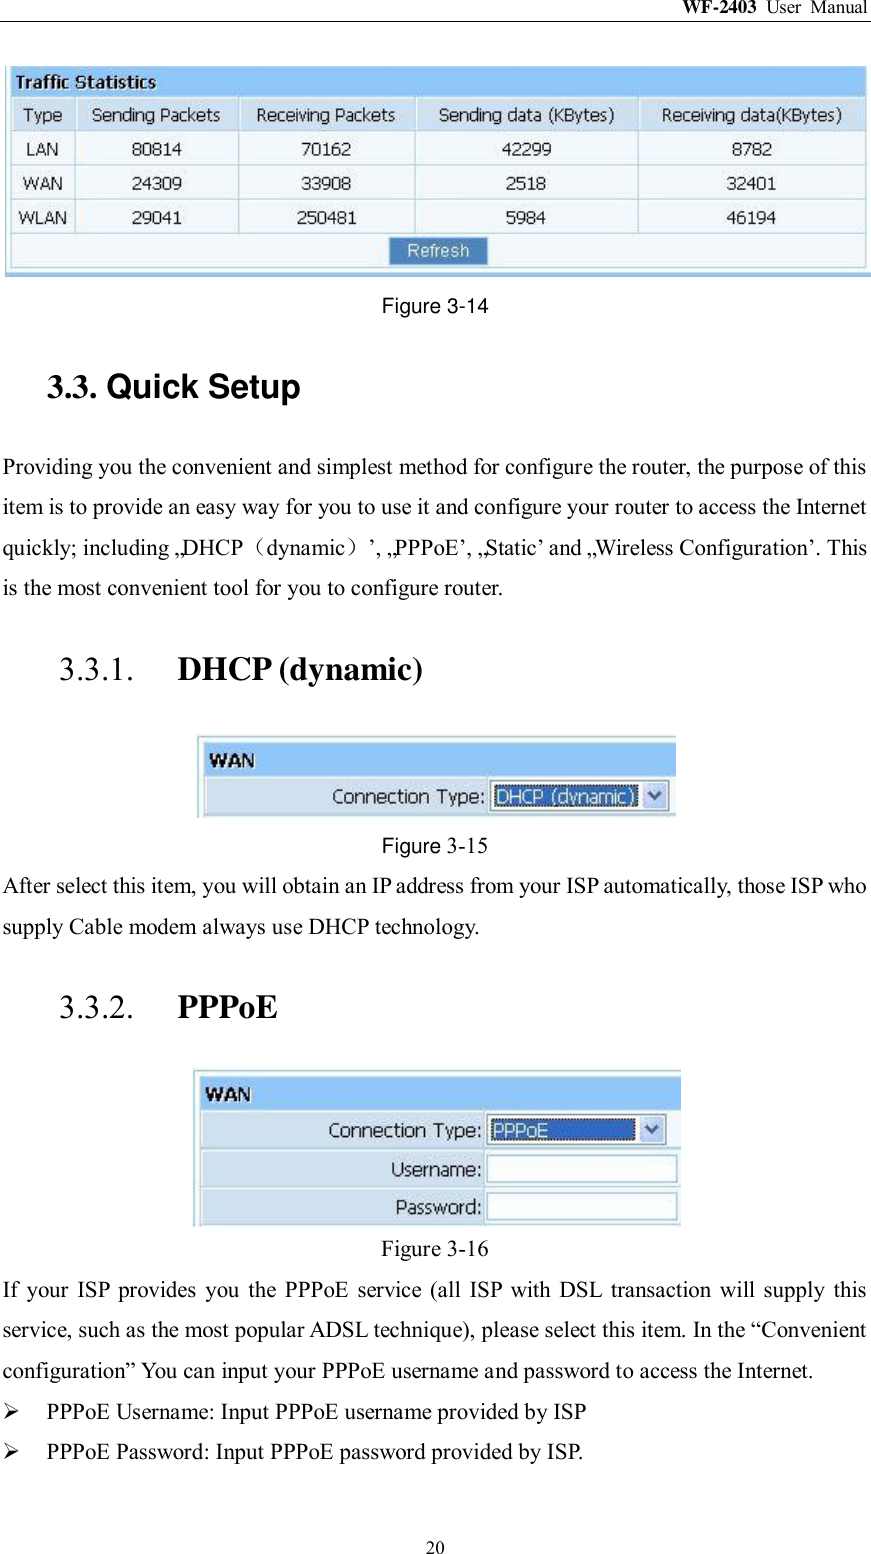 WF-2403  User  Manual  20  Figure 3-14 3.3. Quick Setup Providing you the convenient and simplest method for configure the router, the purpose of this item is to provide an easy way for you to use it and configure your router to access the Internet quickly; including „DHCP（dynamic）‟, „PPPoE‟, „Static‟ and „Wireless Configuration‟. This is the most convenient tool for you to configure router. 3.3.1. DHCP (dynamic)  Figure 3-15 After select this item, you will obtain an IP address from your ISP automatically, those ISP who supply Cable modem always use DHCP technology. 3.3.2. PPPoE    Figure 3-16 If  your  ISP  provides  you  the  PPPoE  service  (all  ISP with  DSL  transaction  will  supply  this service, such as the most popular ADSL technique), please select this item. In the “Convenient configuration” You can input your PPPoE username and password to access the Internet.  PPPoE Username: Input PPPoE username provided by ISP  PPPoE Password: Input PPPoE password provided by ISP. 